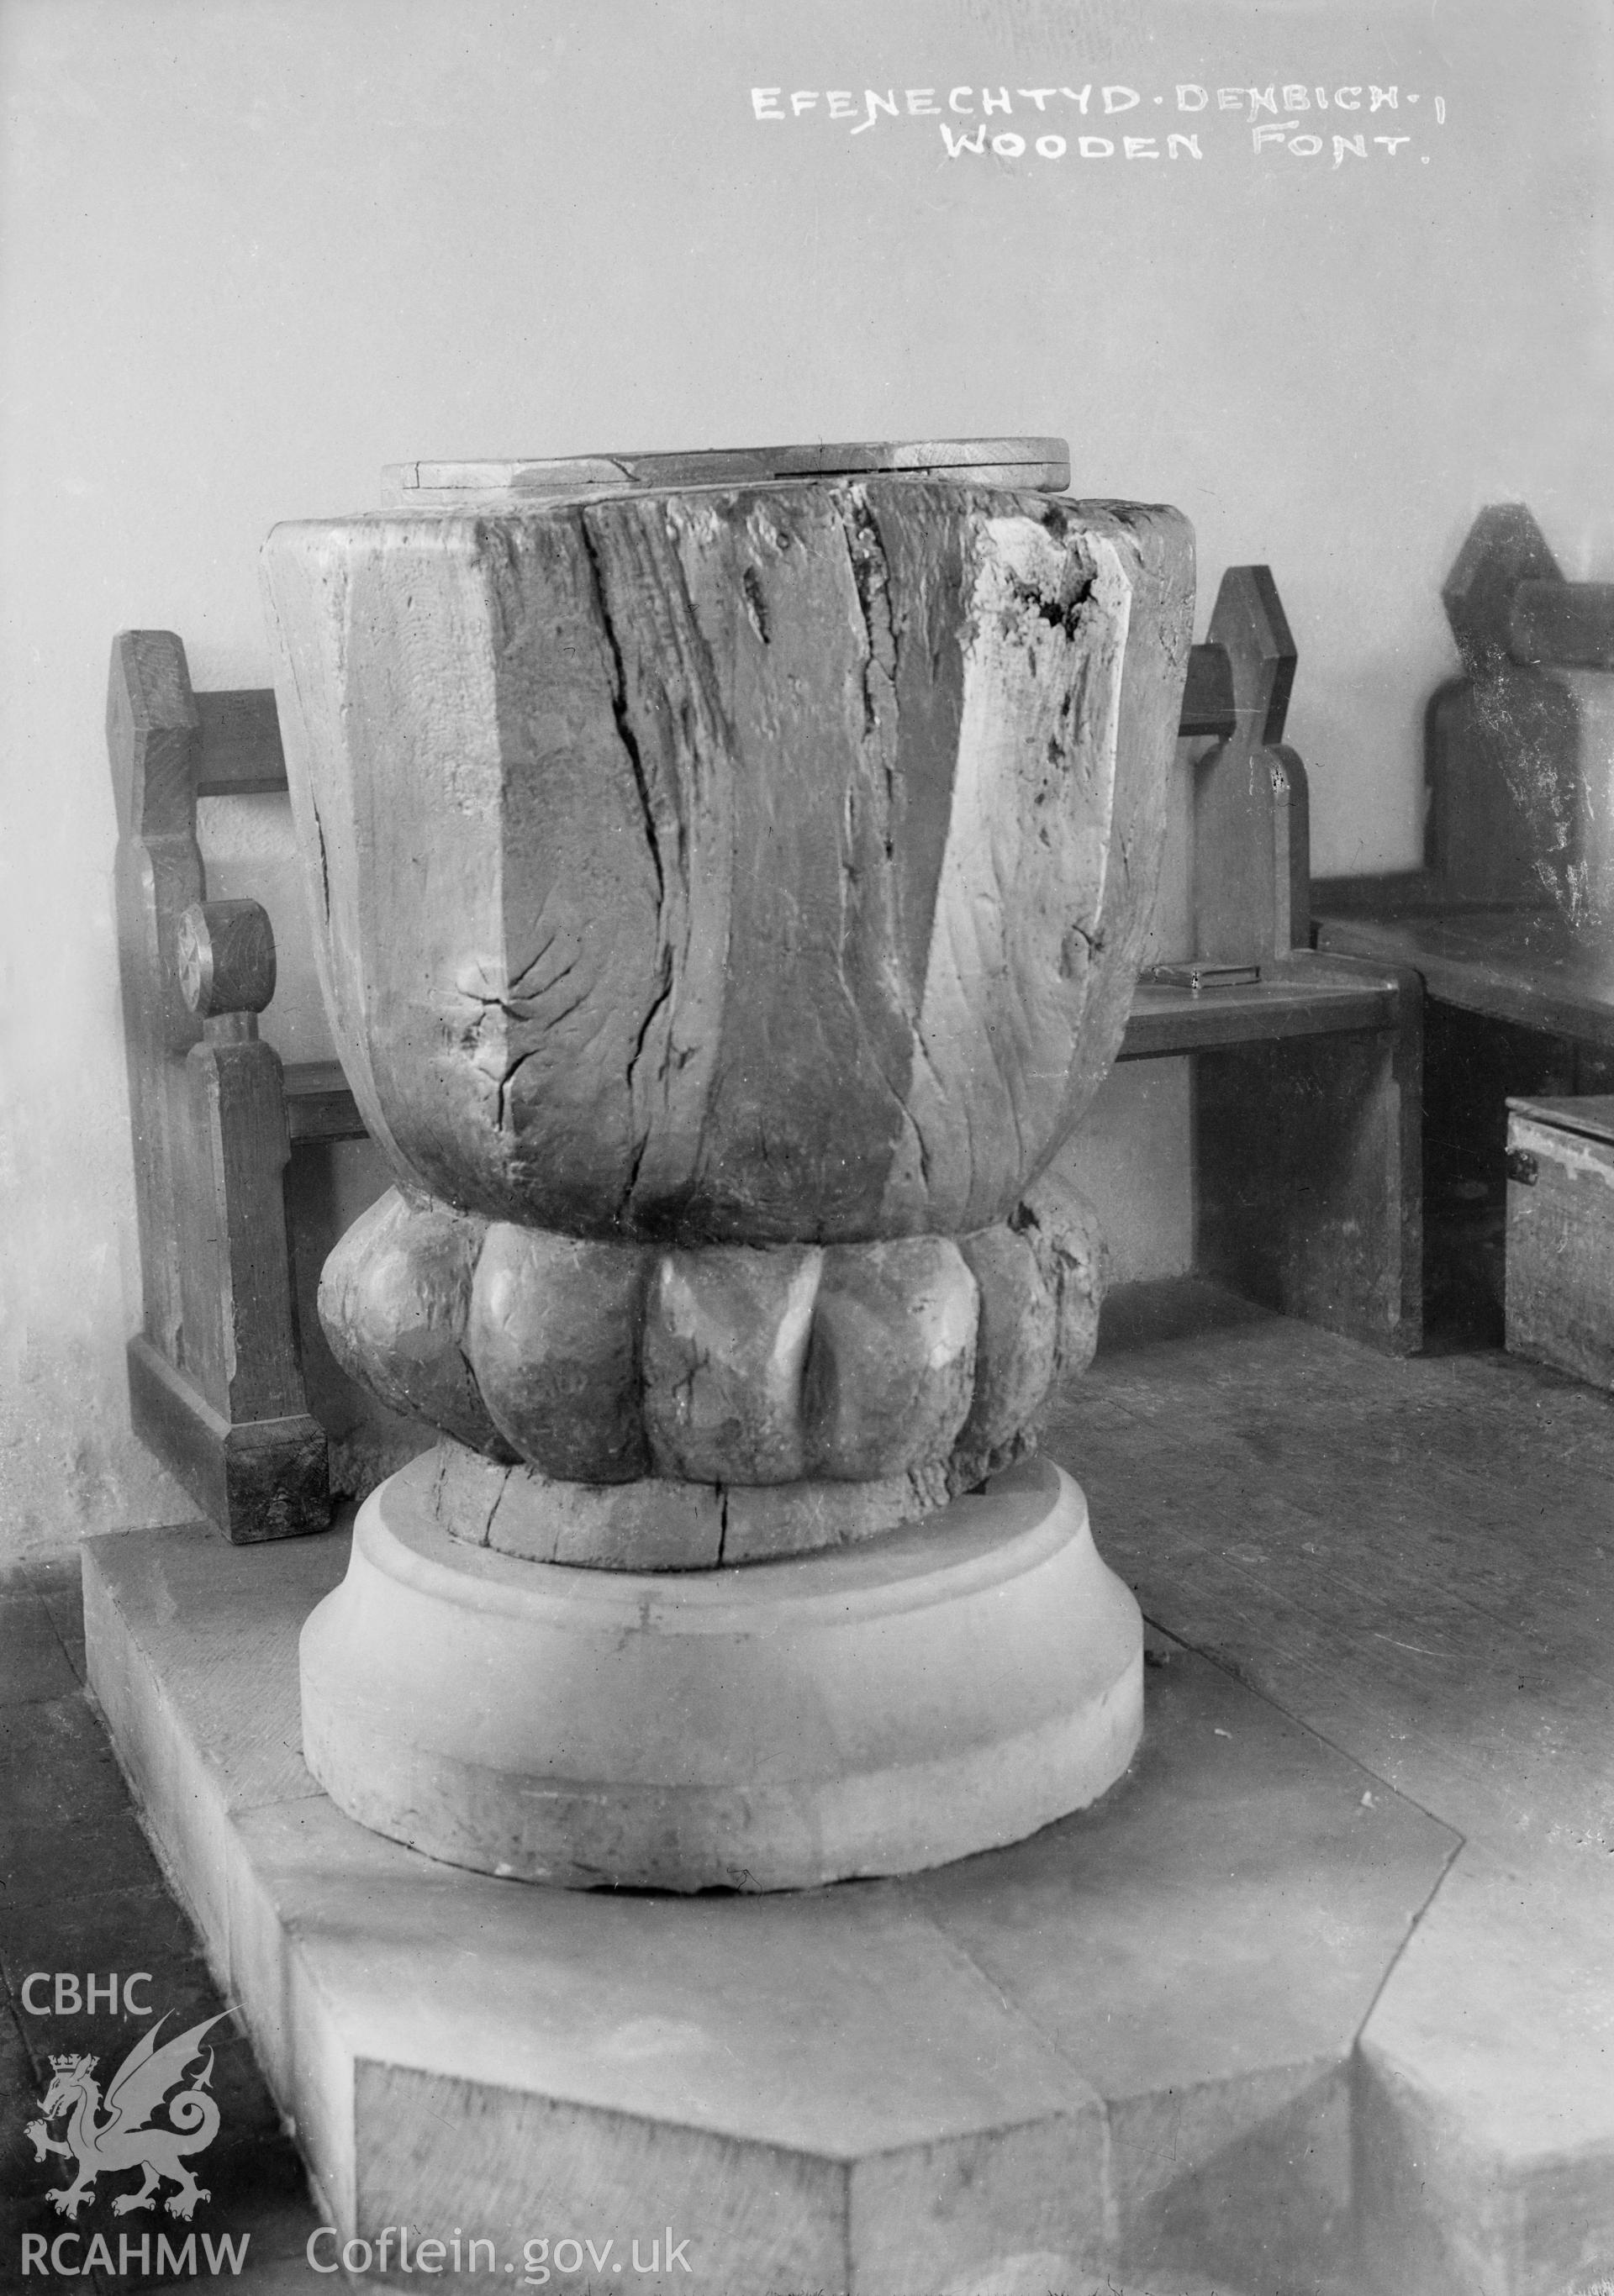 Black and white photograph of the font at St Michael's Church, Efenechtyd.